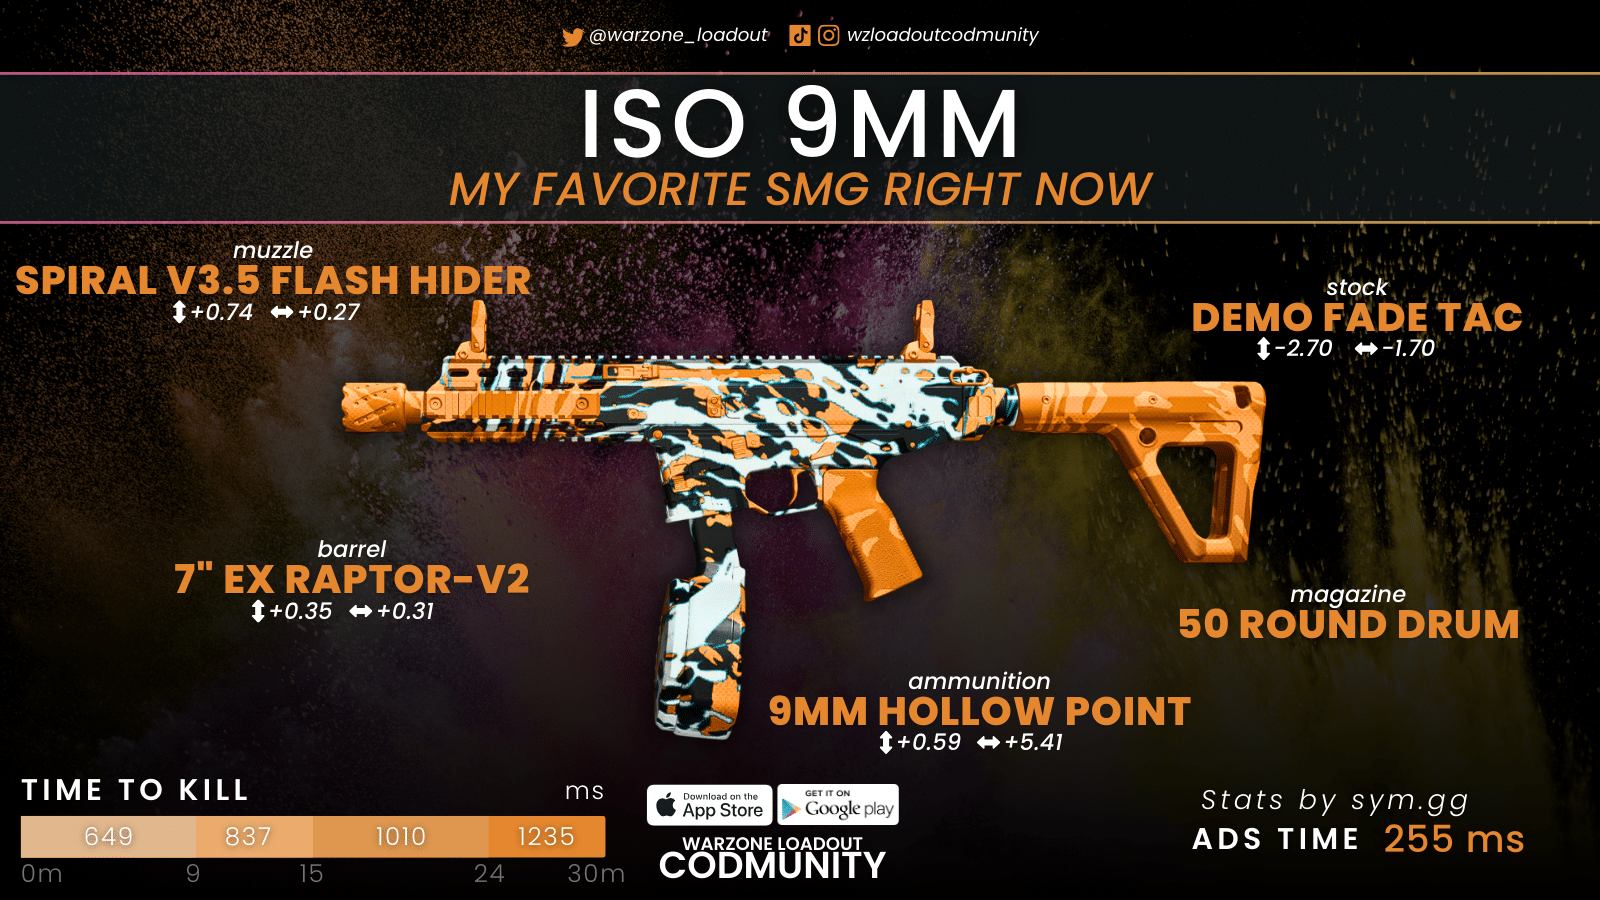 Best ISO 9mm Warzone Loadouts - Meta builds for this amazing SMG!